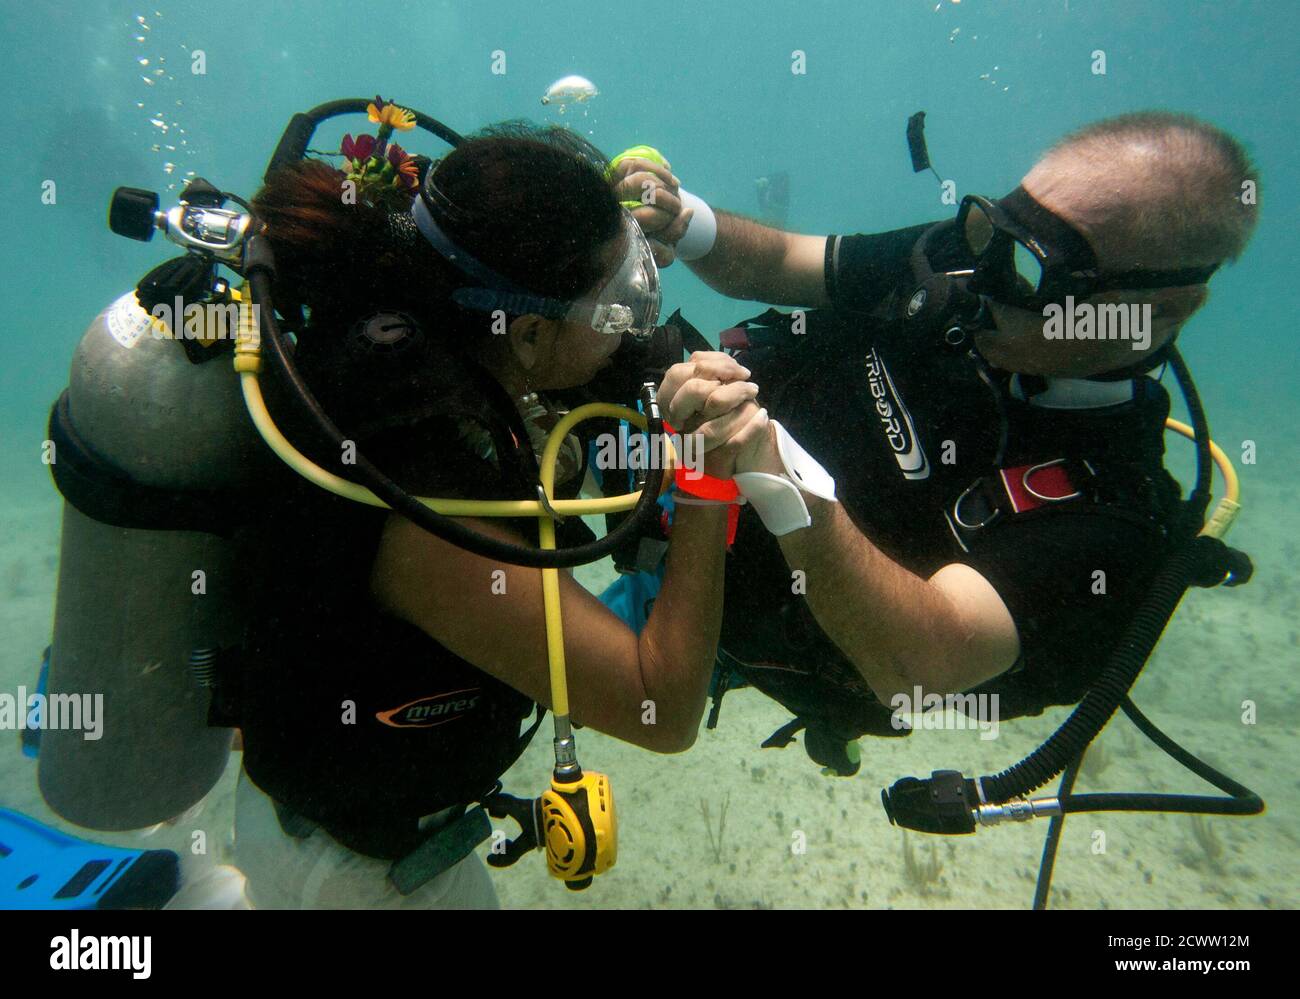 Mexican Karla Olivares-Sosa Ysunza and her husband Alberto Dal Lago from Italy hold hands with each other after their underwater wedding ceremony in Punta Venado beach in Playa del Carmen July 17, 2011. Dal Lago said that 205 certified divers participated in the wedding which was an attempt at breaking the previous Guinness Record set for such an event, in addition to bringing awareness towards creating laws for protecting bull sharks in the area. According to Guinness World Records, the previous record for largest underwater wedding was set on June 12, 2010 when 261 divers participated in the Stock Photo